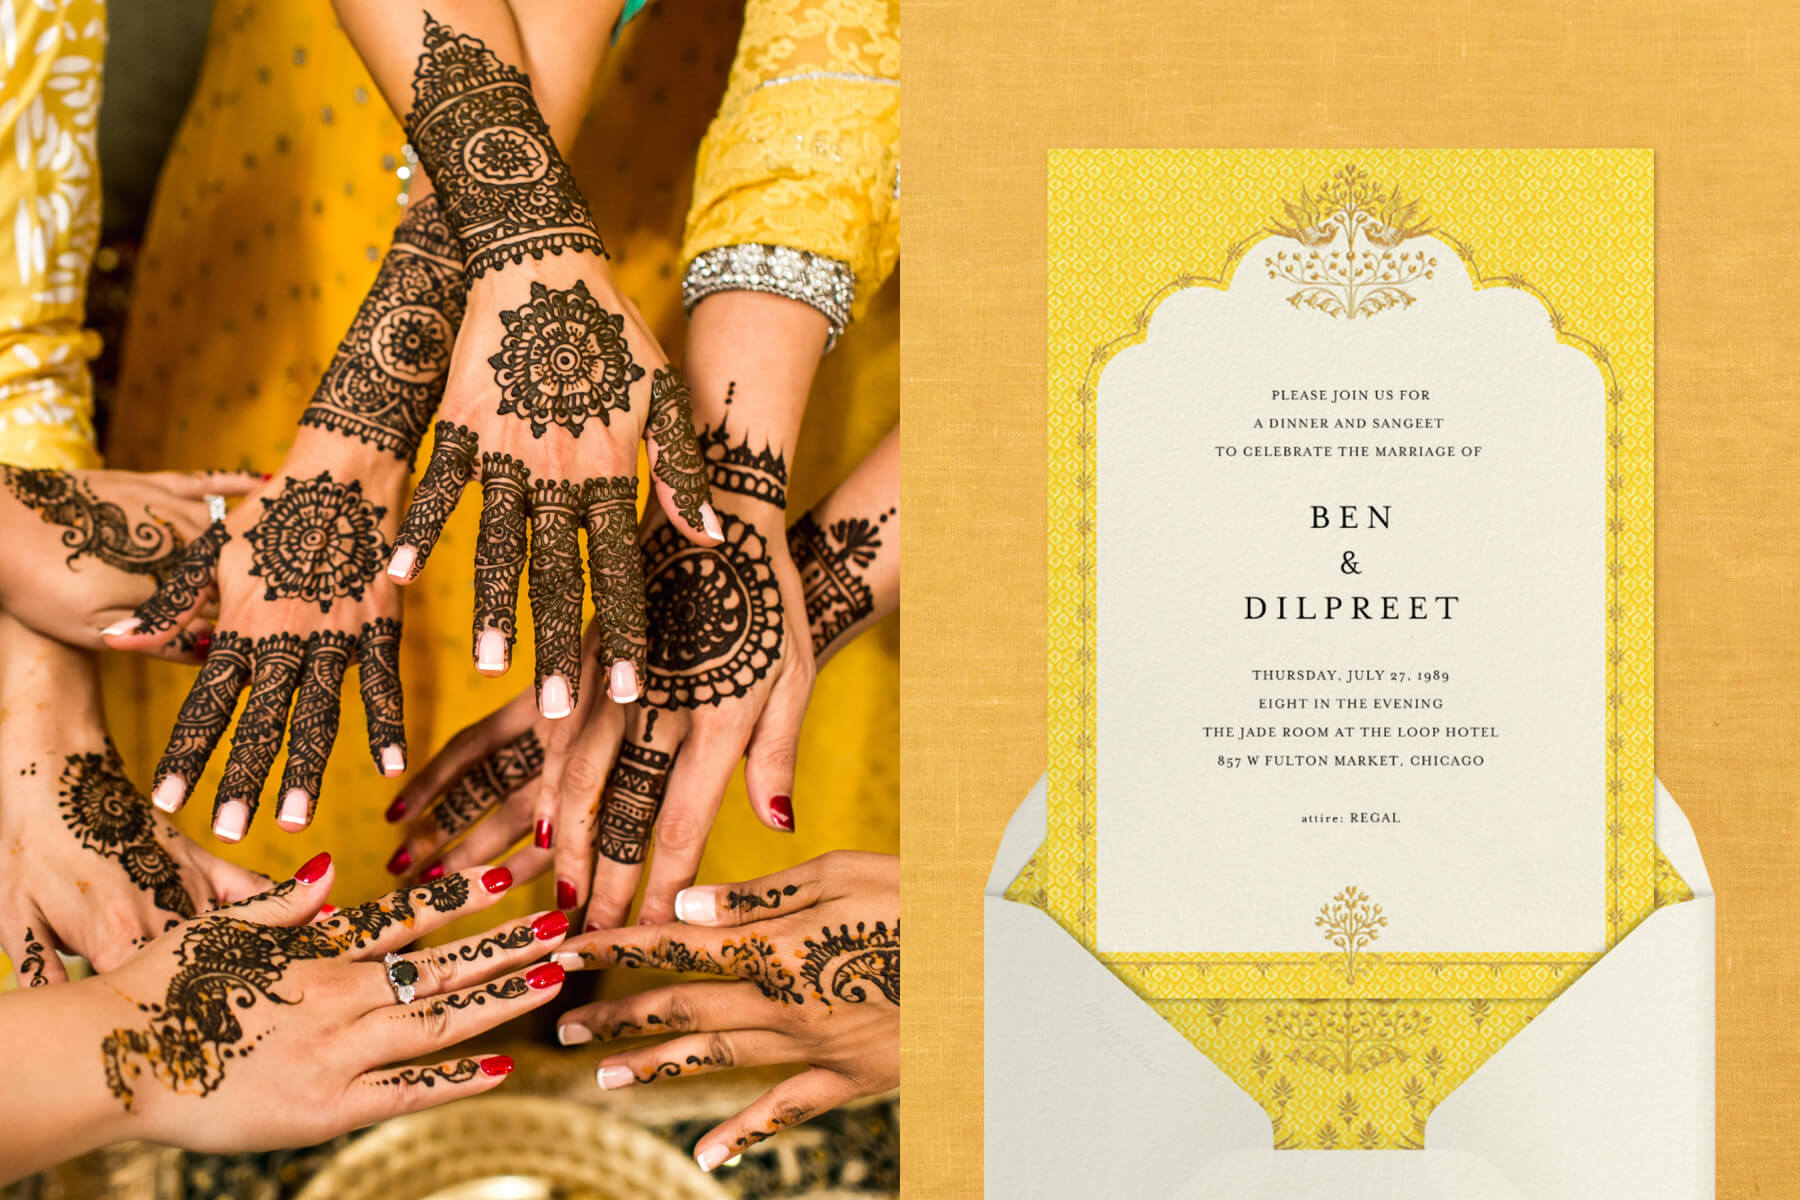 Left - Womens’ hands covered in mendhi. Right - A yellow Indian wedding invitation featuring an ornate border and an illustration of birds and flowers.